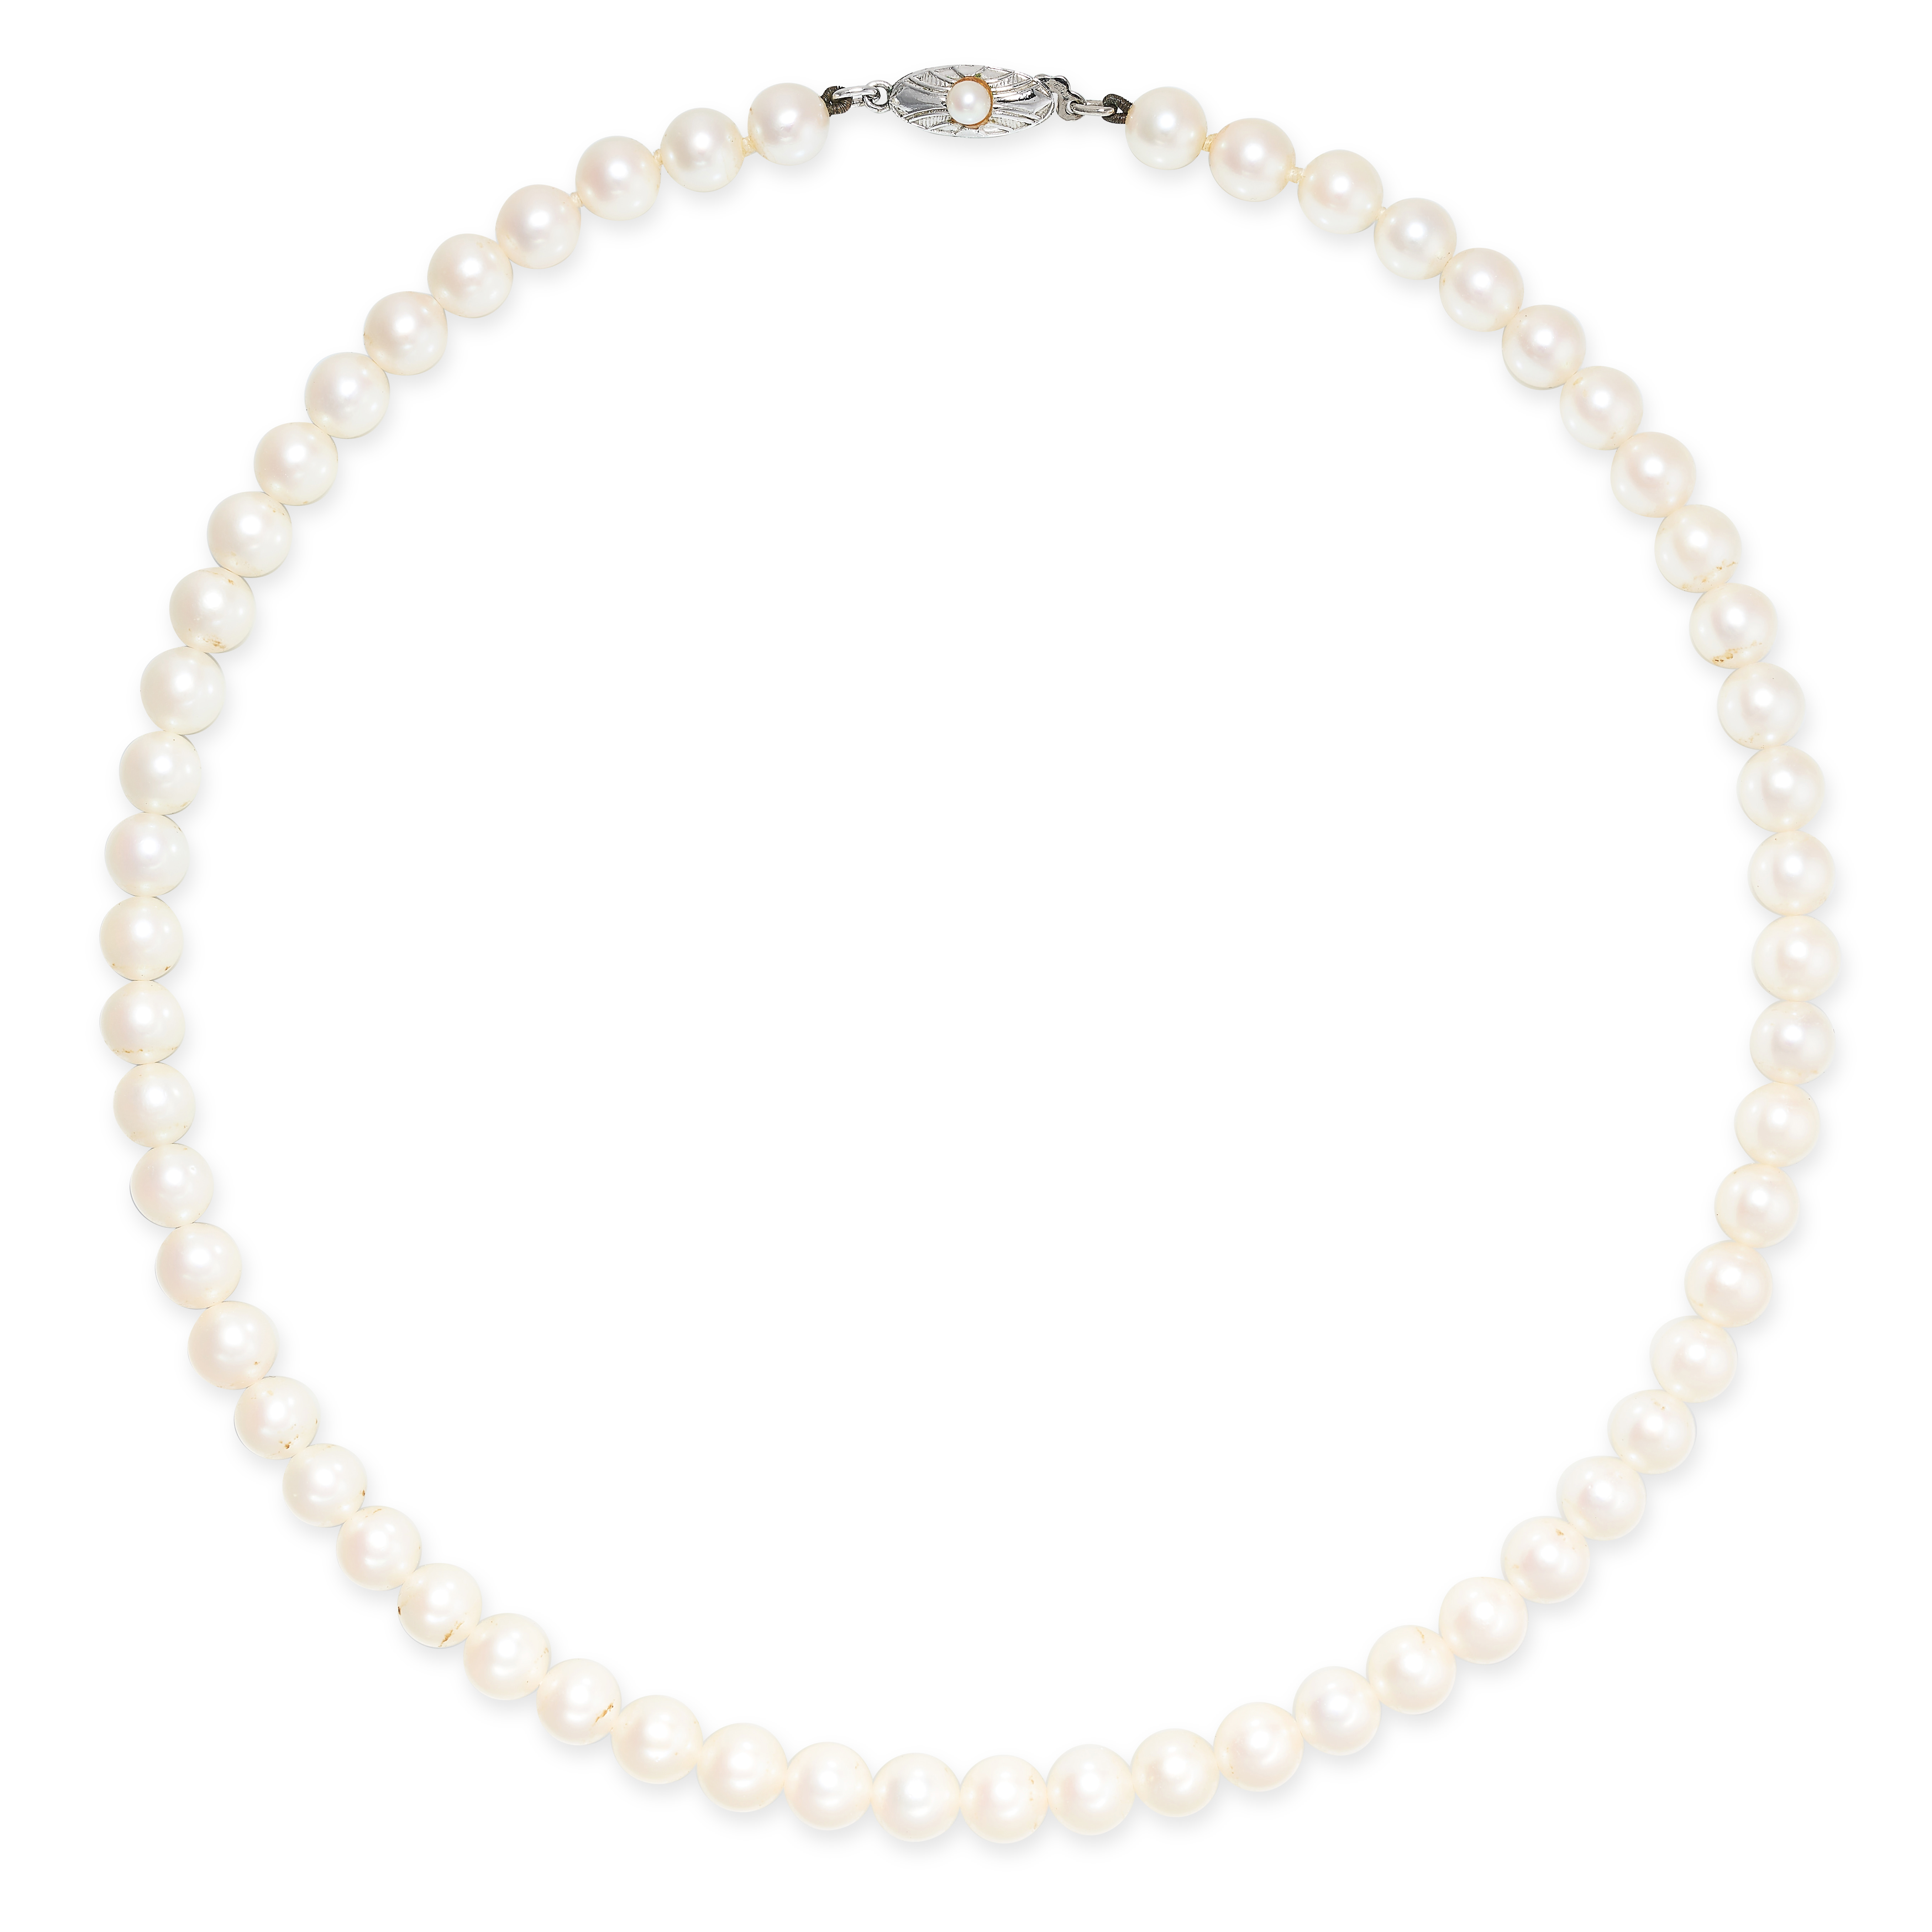 NO RESERVE - MIKIMOTO, A VINTAGE PEARL NECKLACE comprising a single row of pearls of 6.5mm, the